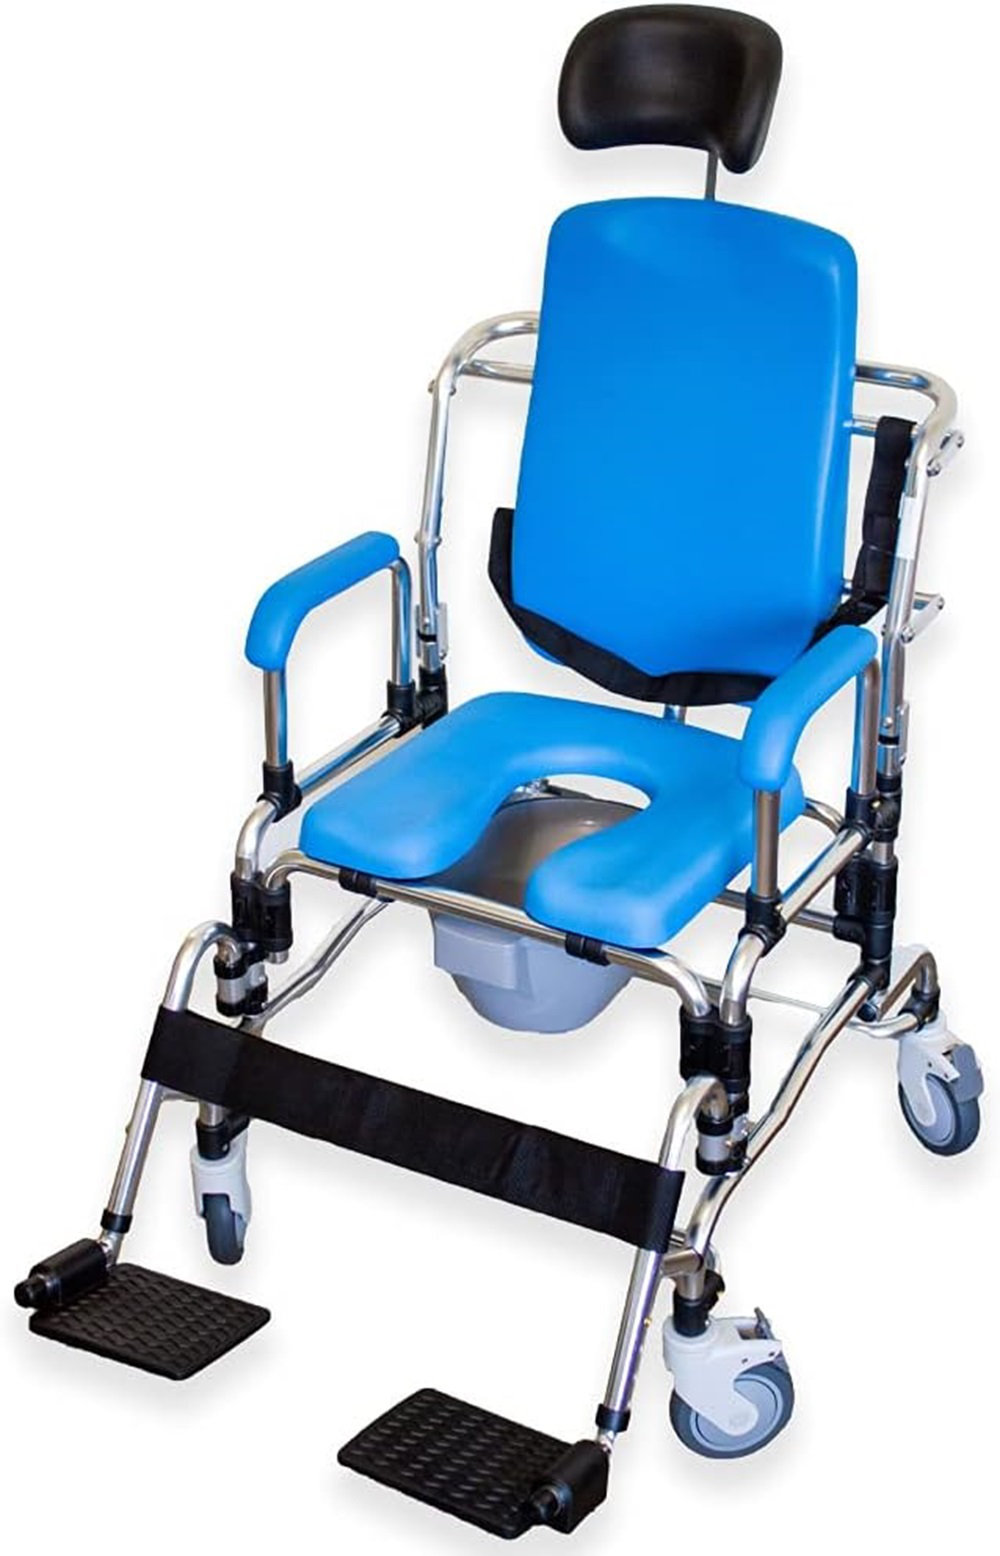 MCombo Shower Chair Padded with Cutout for Elderly, No Assembly Needed